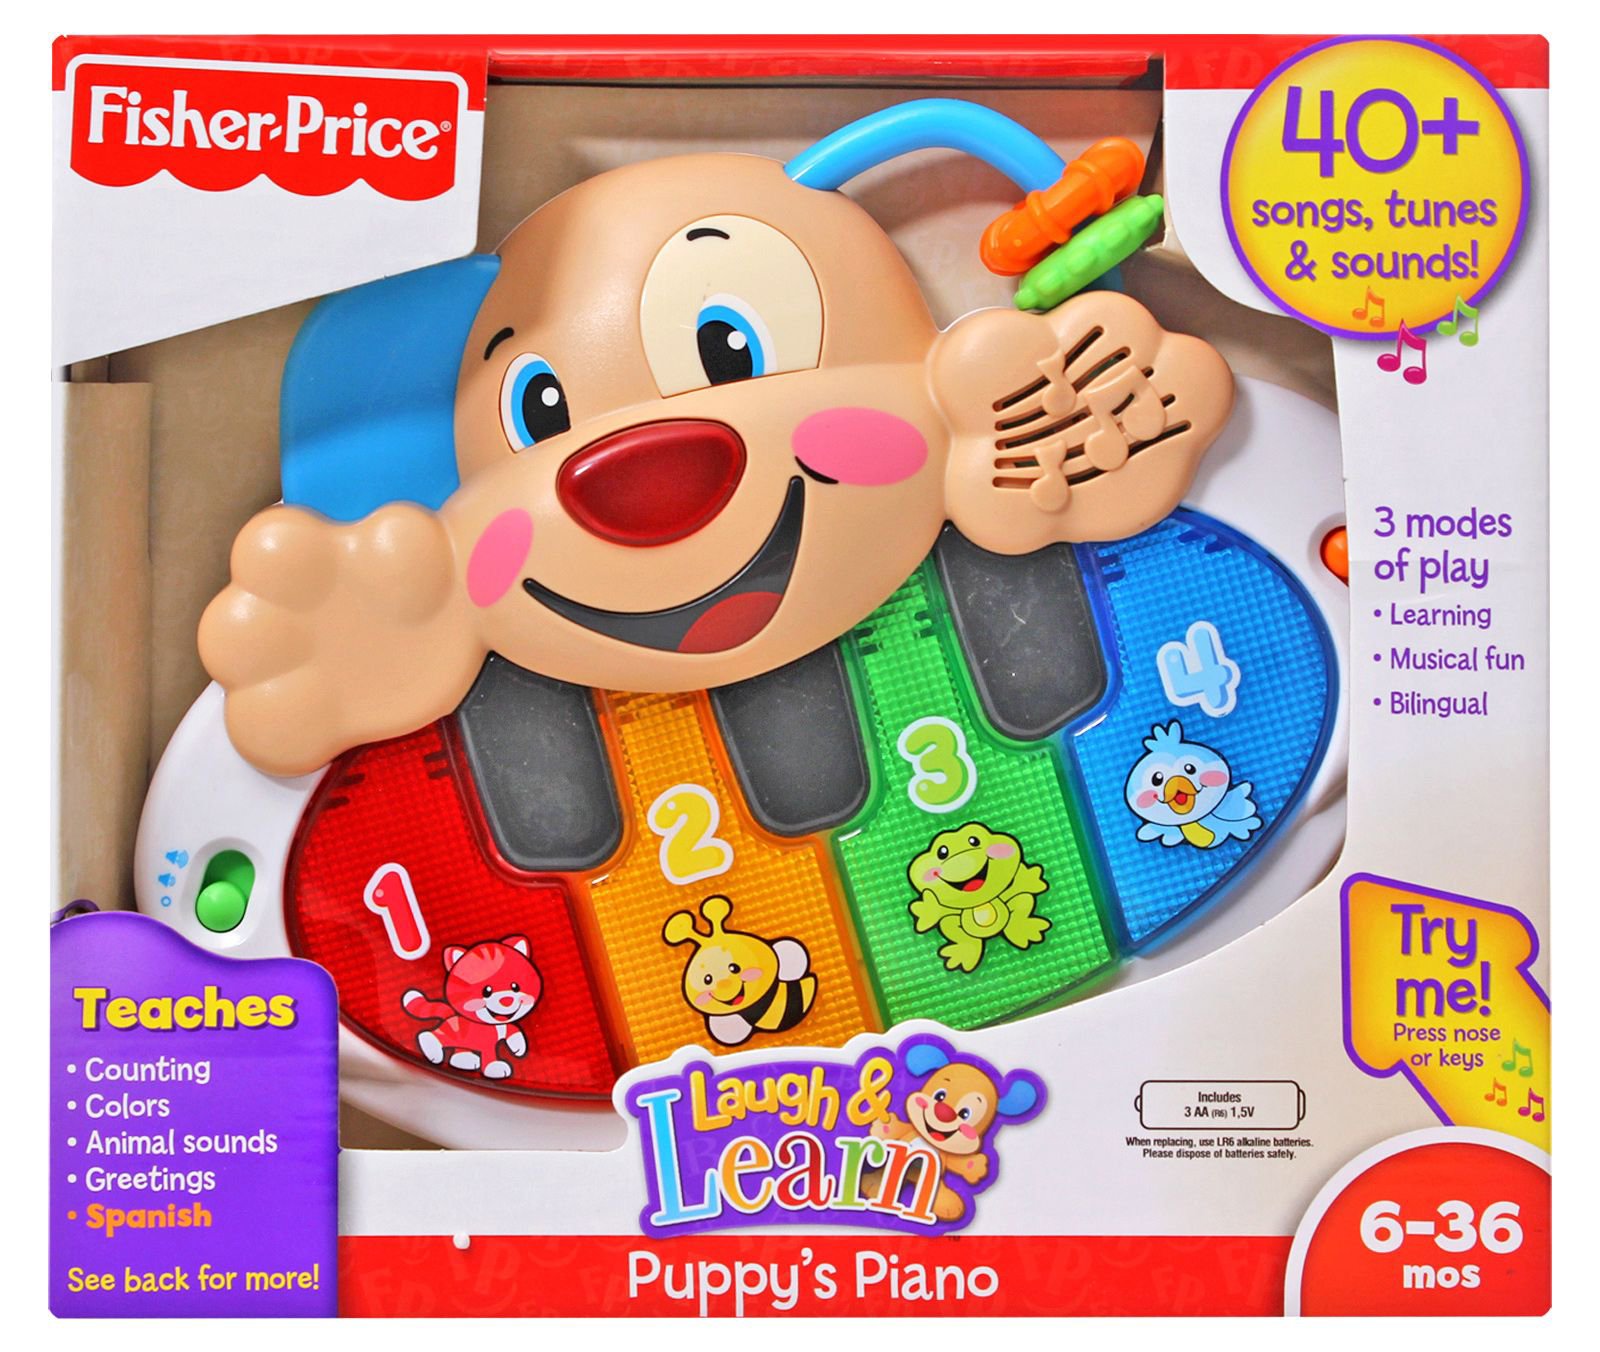 FisherPrice Laugh & Learn Puppy Piano (636 Months